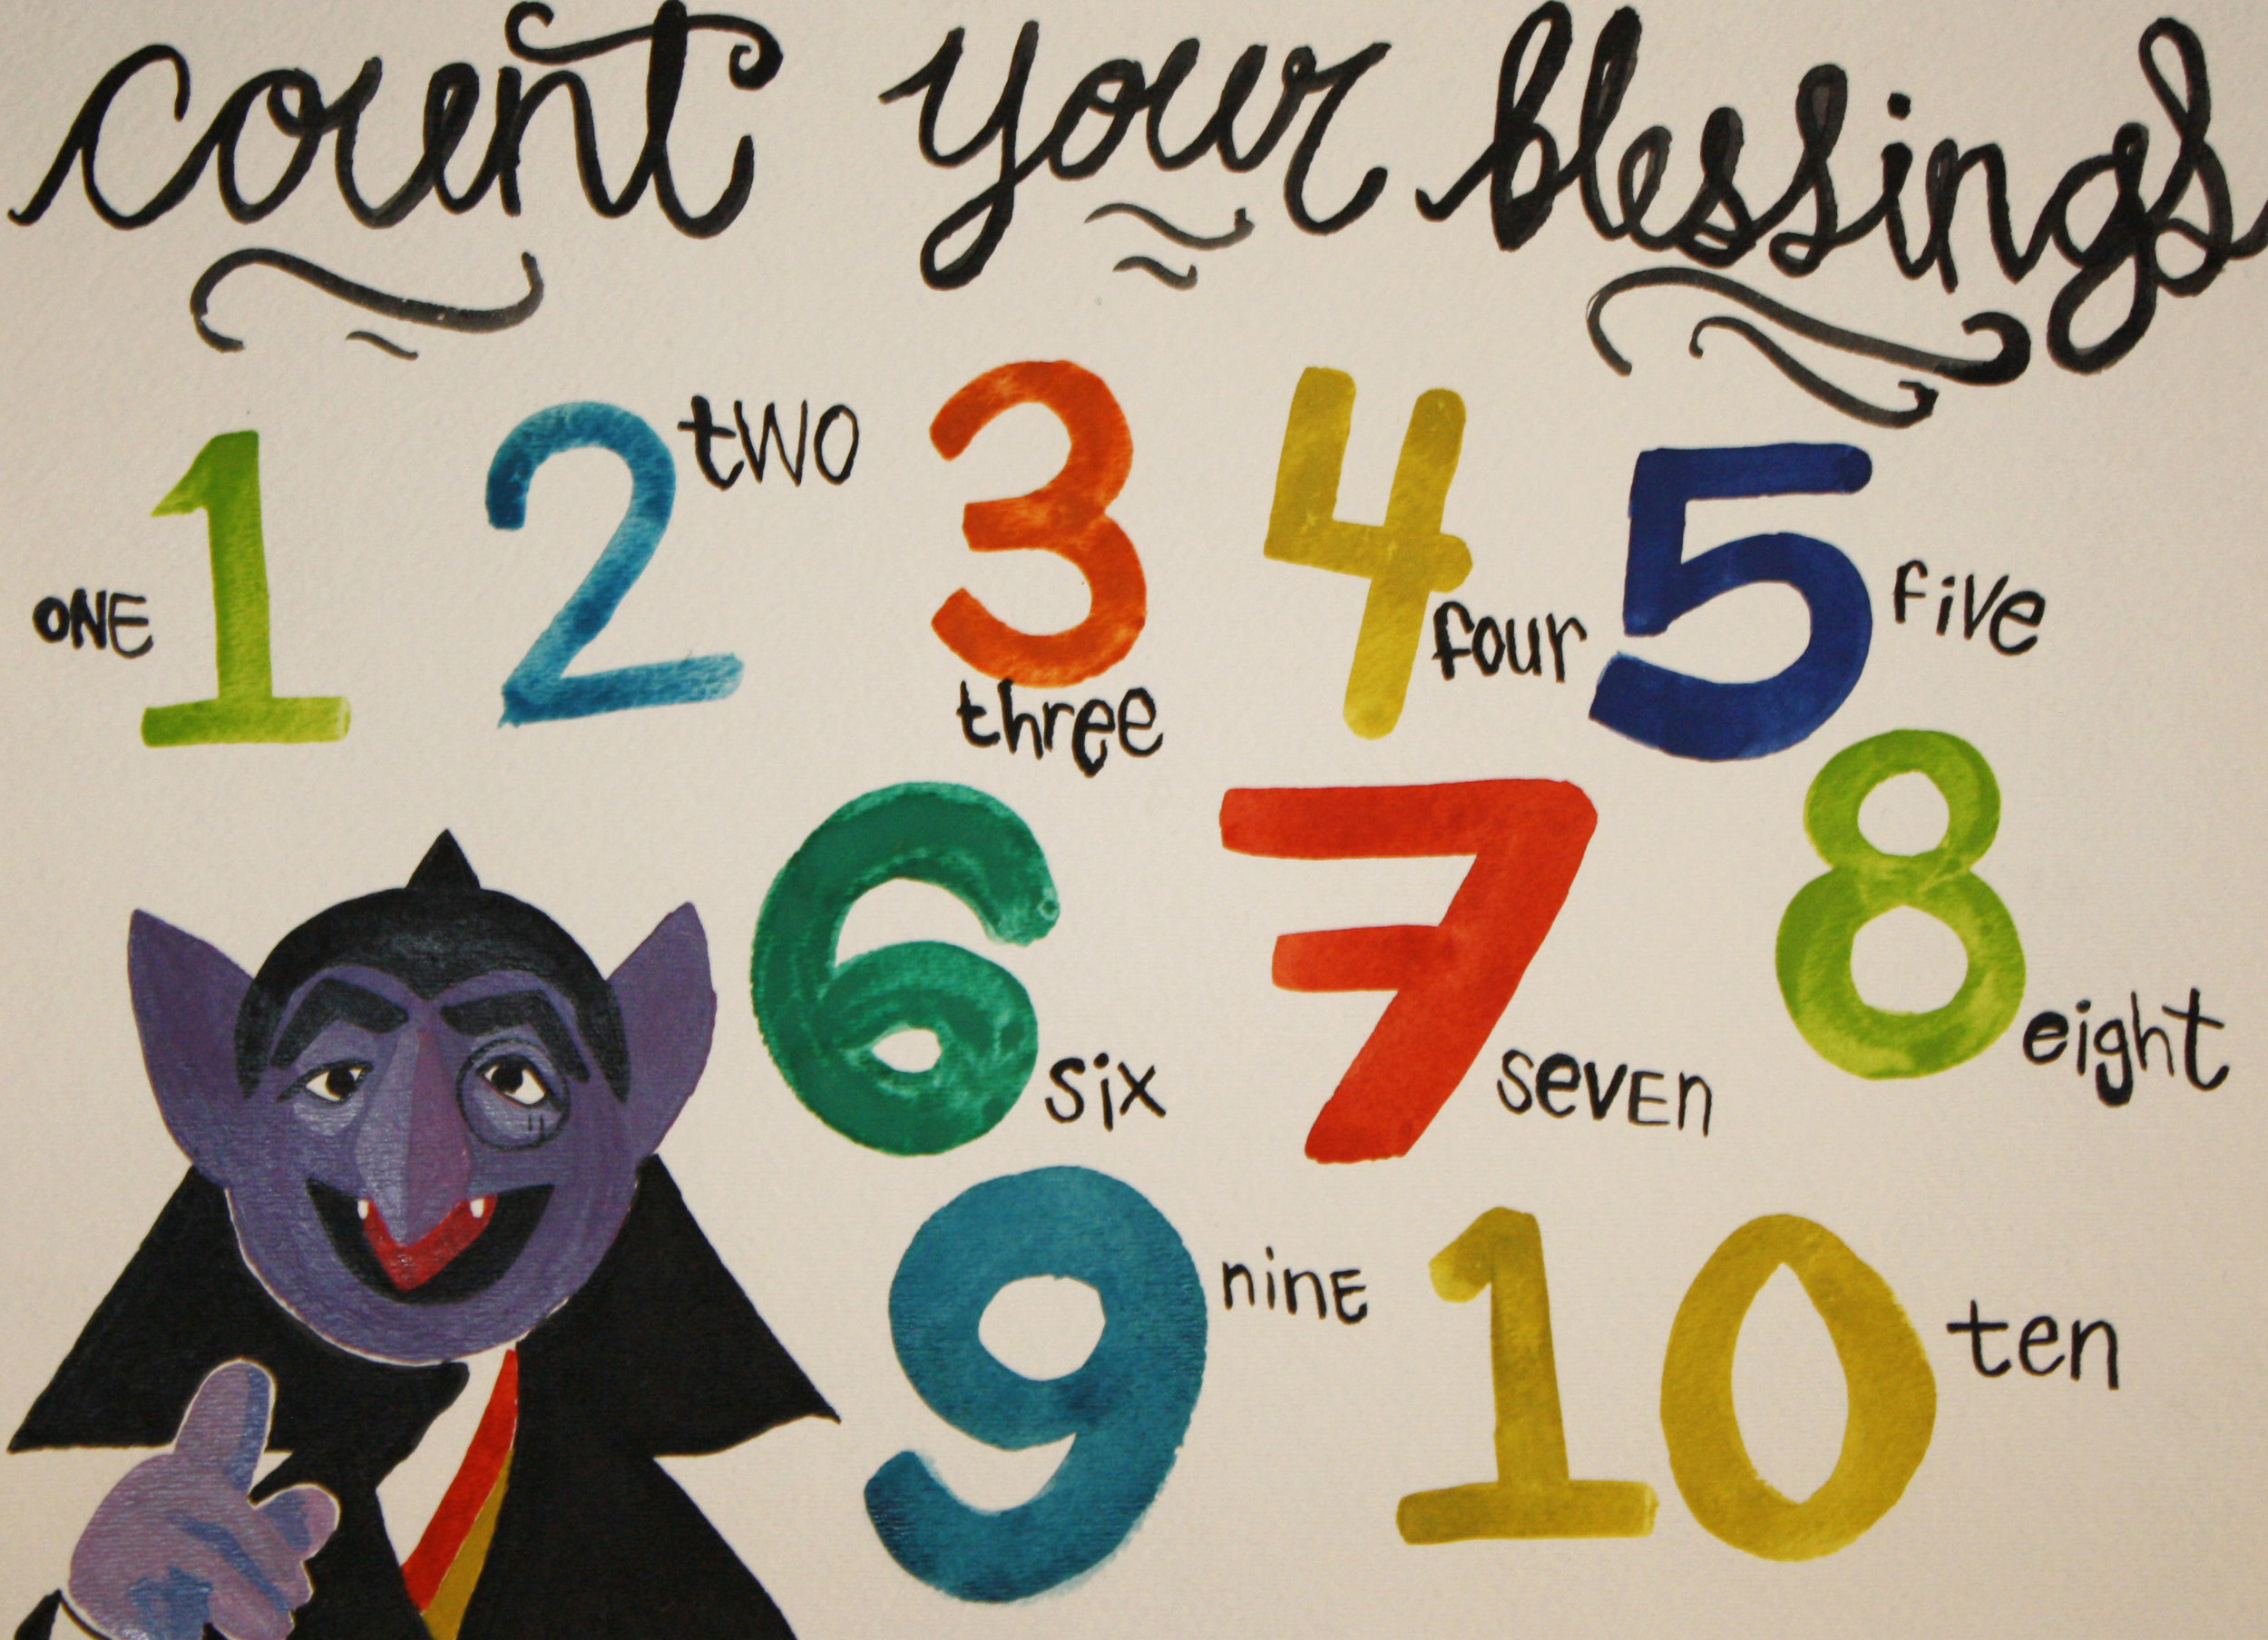   count your blessings   watercolor on paper  11" x 15"  2013 